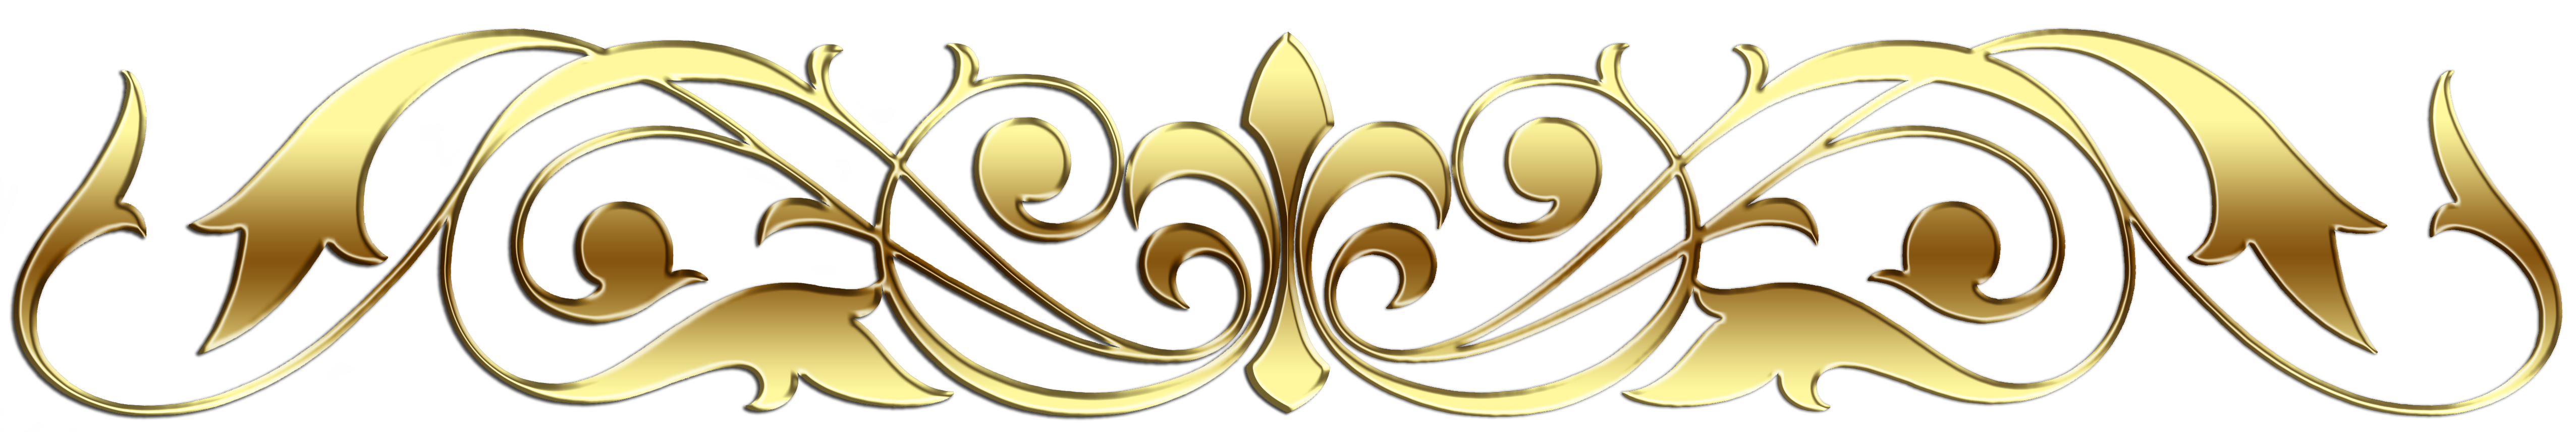 Gold Scroll Borders Png Http   Theinspirededge Com Services